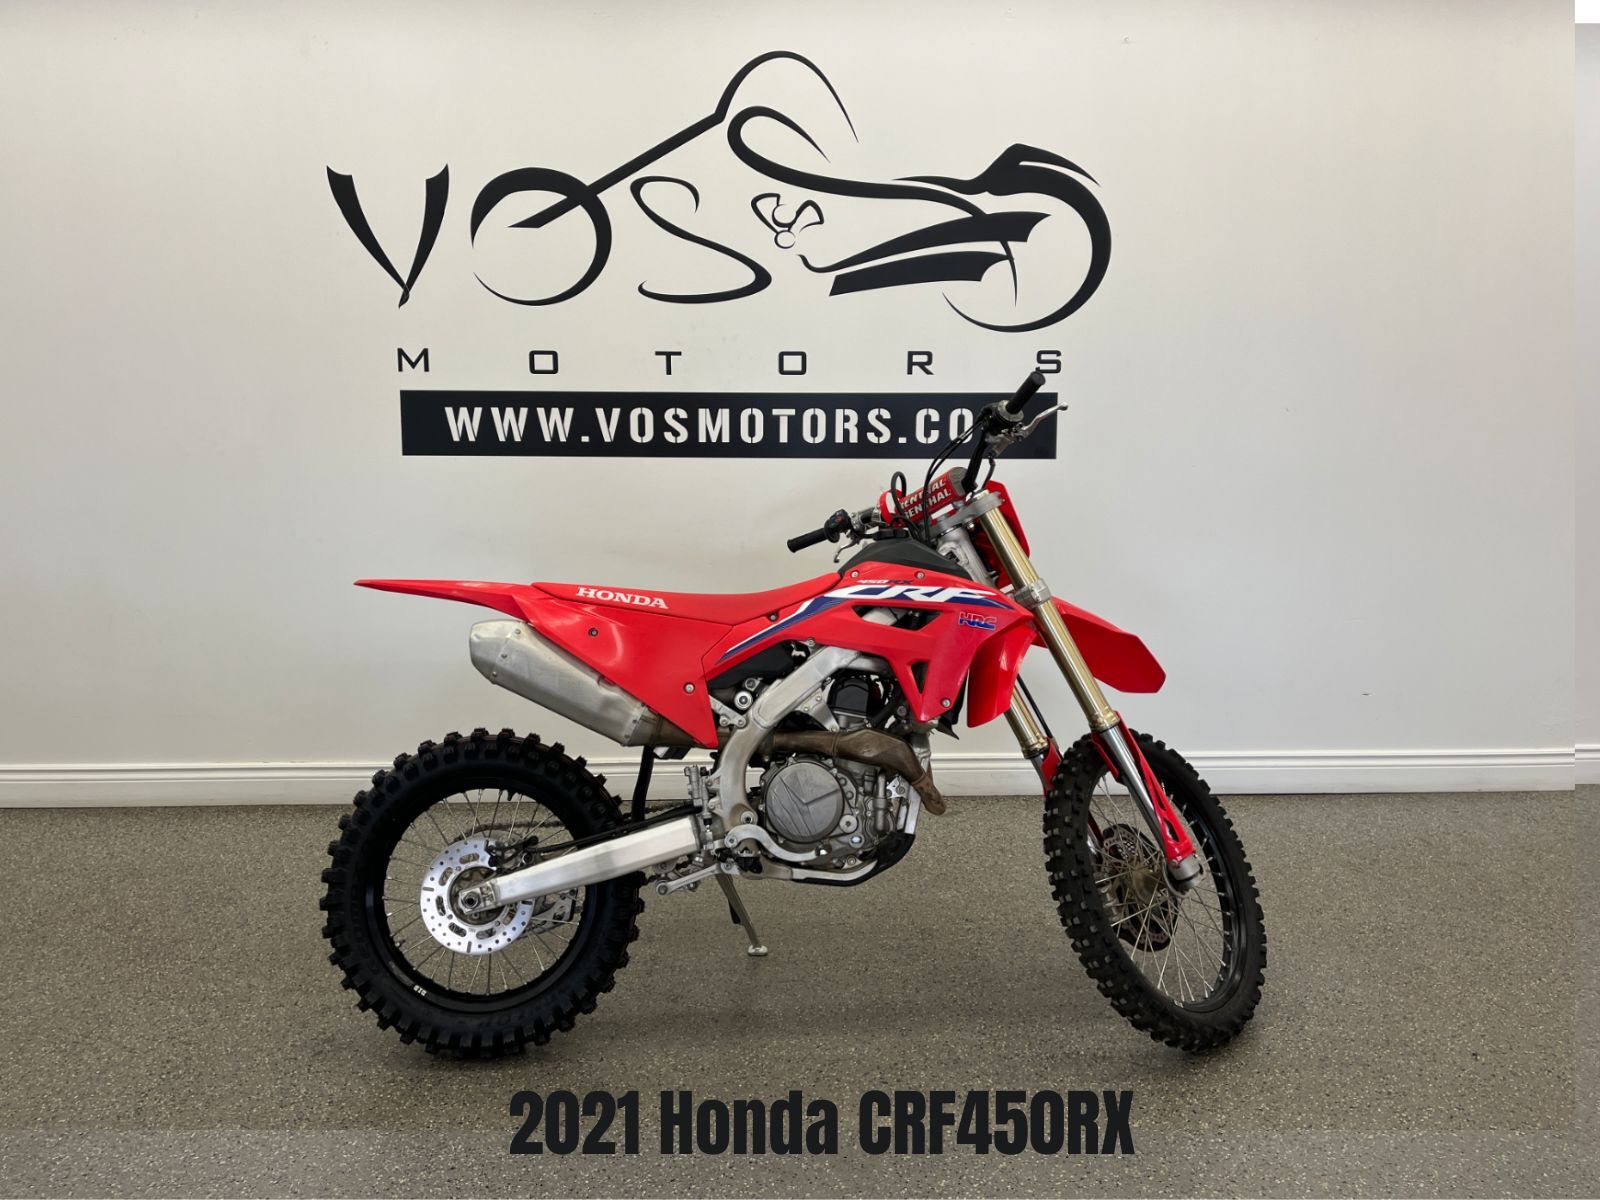 2021 Honda CRF450RX CRF450RX - V4873 - -No Payments for 1 Year**